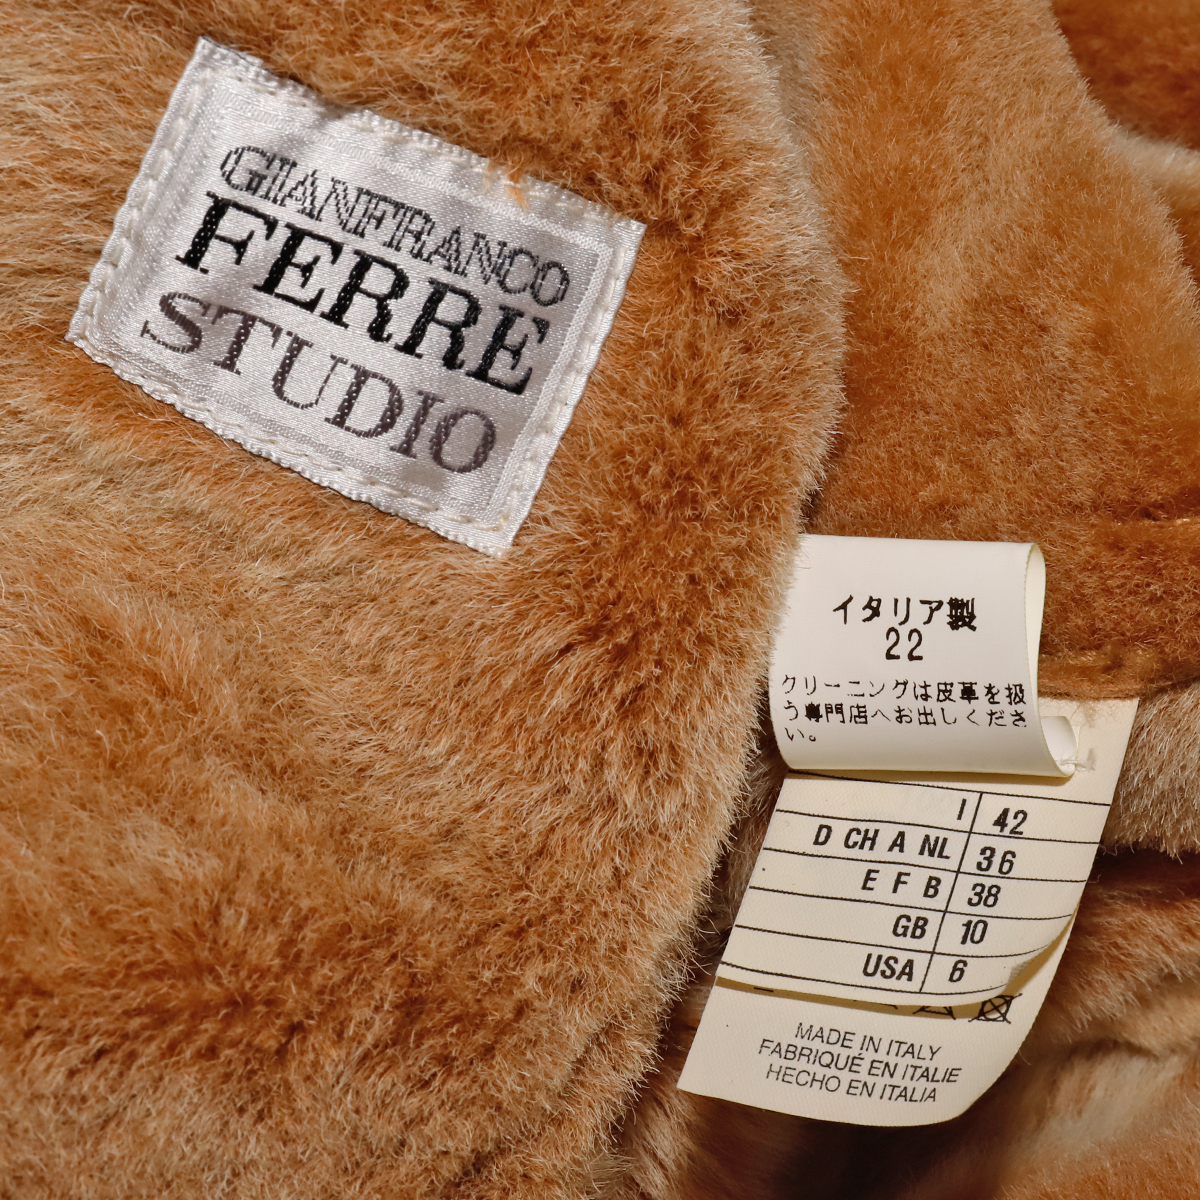  genuine article fere ultimate rare 132cm maxi height top class . sheep leather sia ring Ram fur fur long mouton coat size 42 outer jacket FERRE